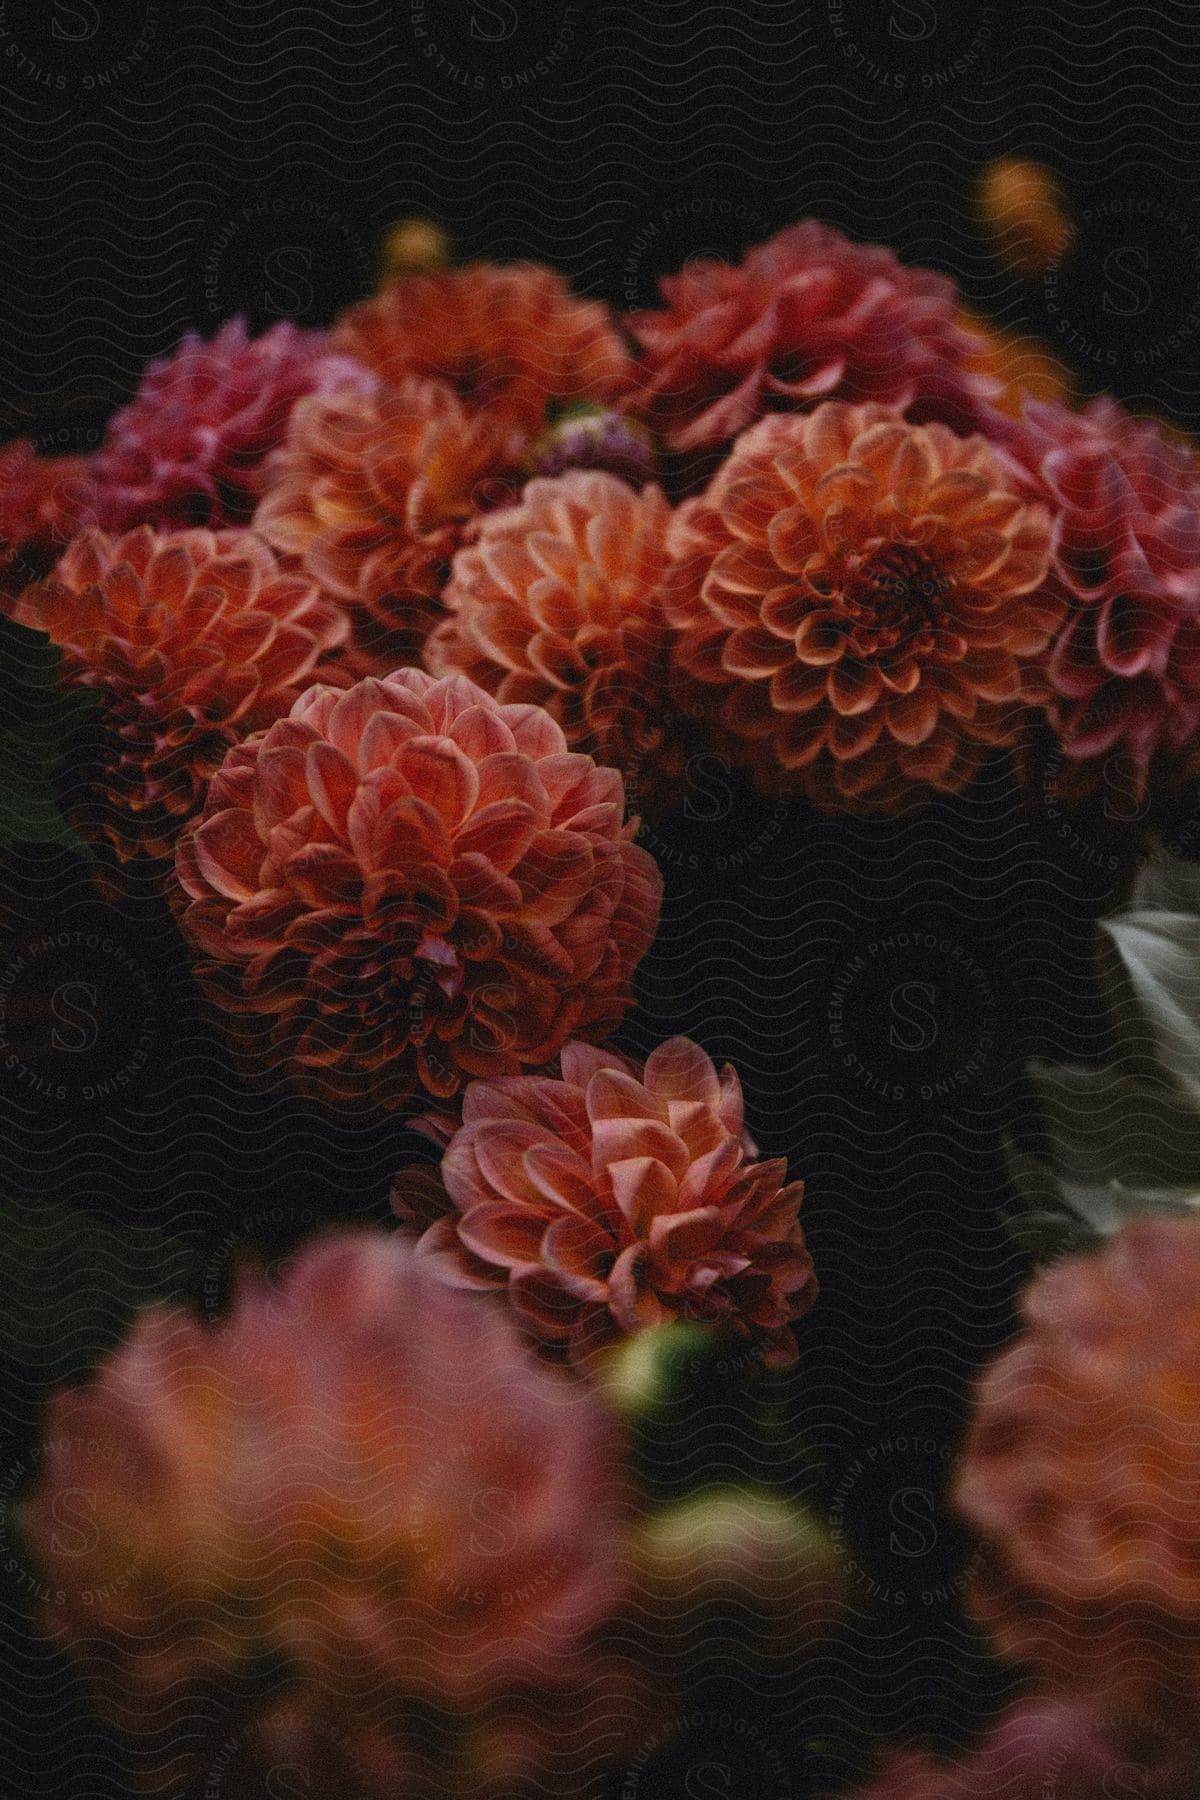 A group of colorful flowers with petals in shades of pink and orange